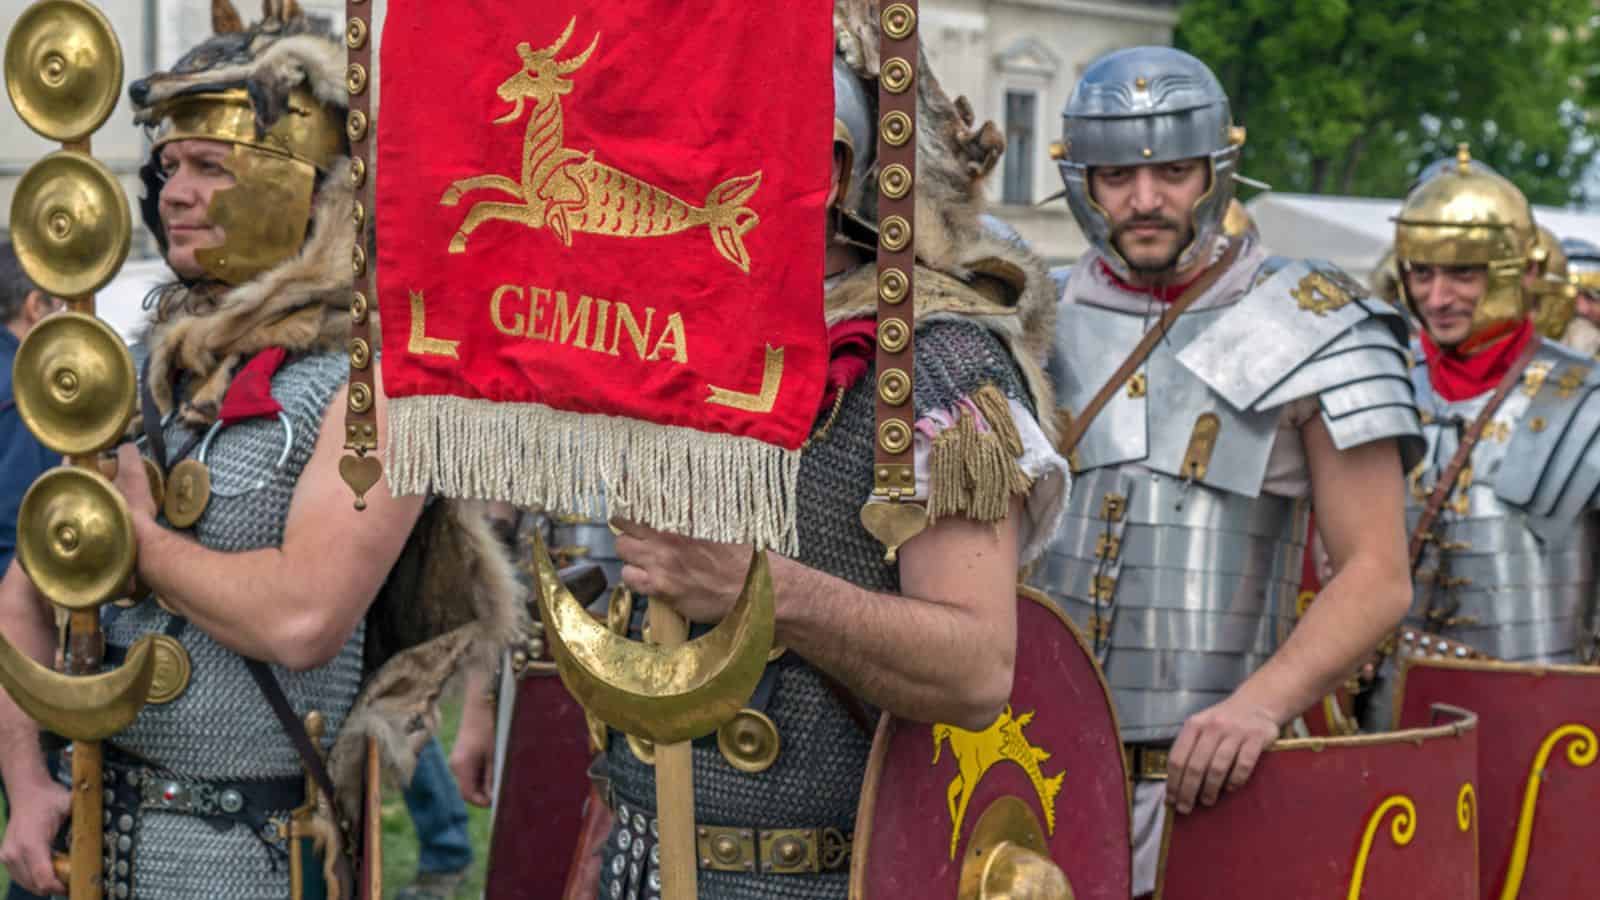 Roman soldiers in battle costume, present at APULUM ROMAN FESTIVAL, organized by the City Hall